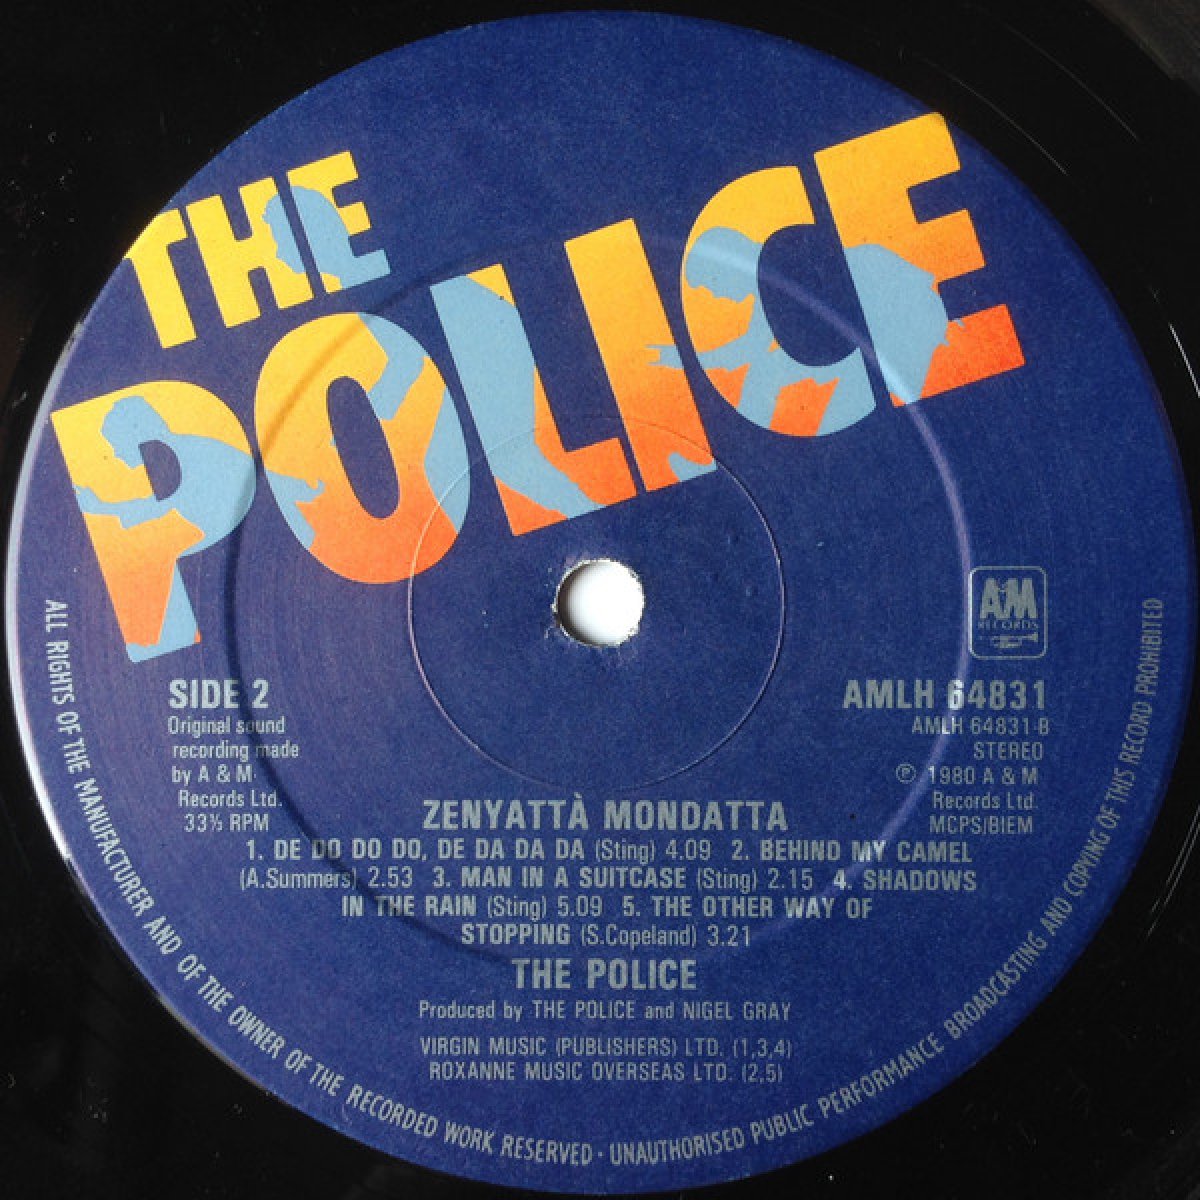 The police don t have. Zenyatta Mondatta. The Police Zenyatta Mondatta 1980. The Police Zenyatta Mondatta 1980 album Cover. The Police - don't Stand so close to me.